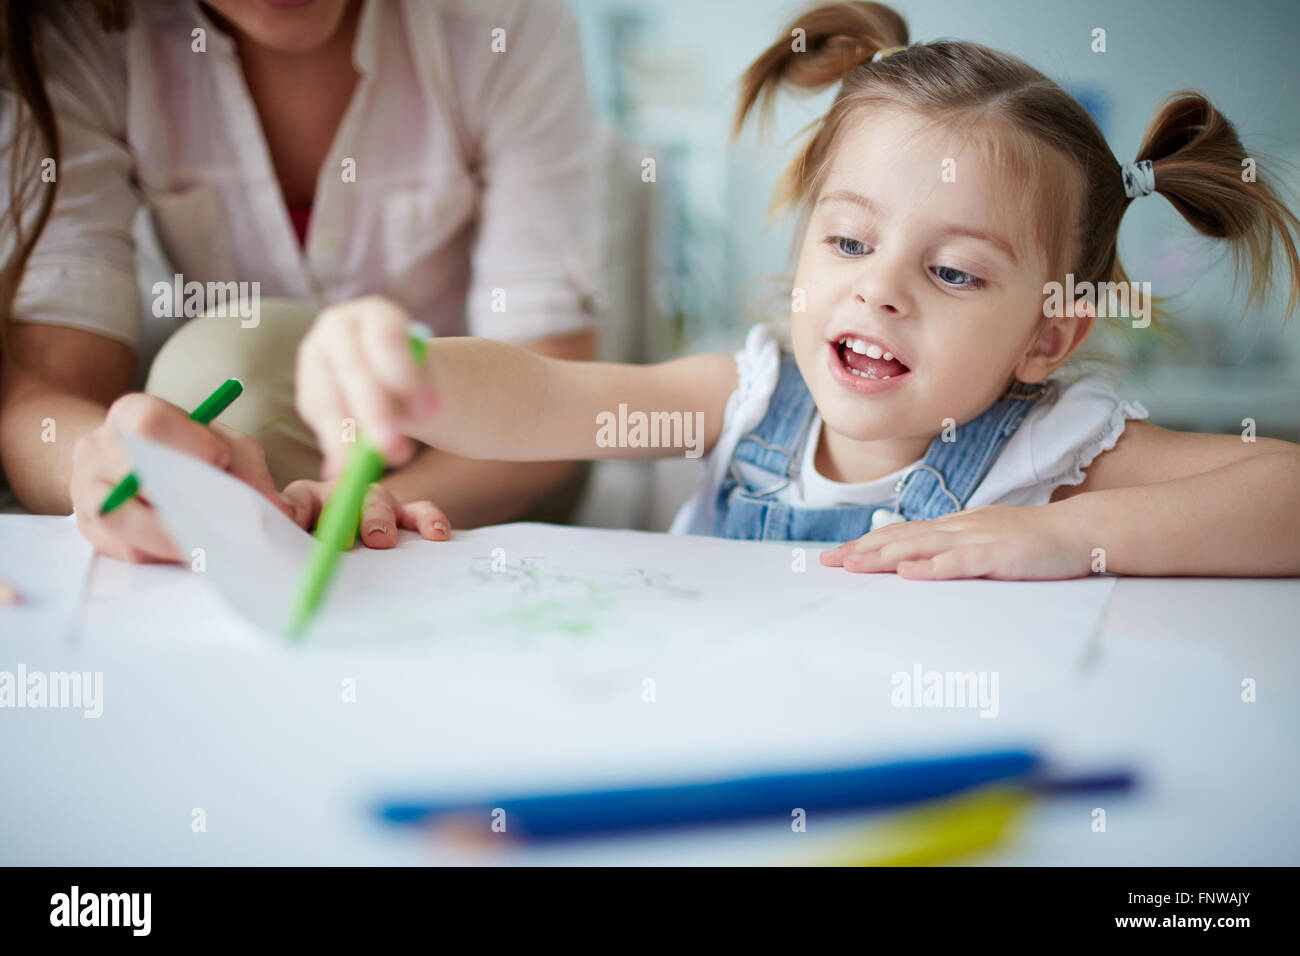 Cute little girl drawing a picture Stock Photo